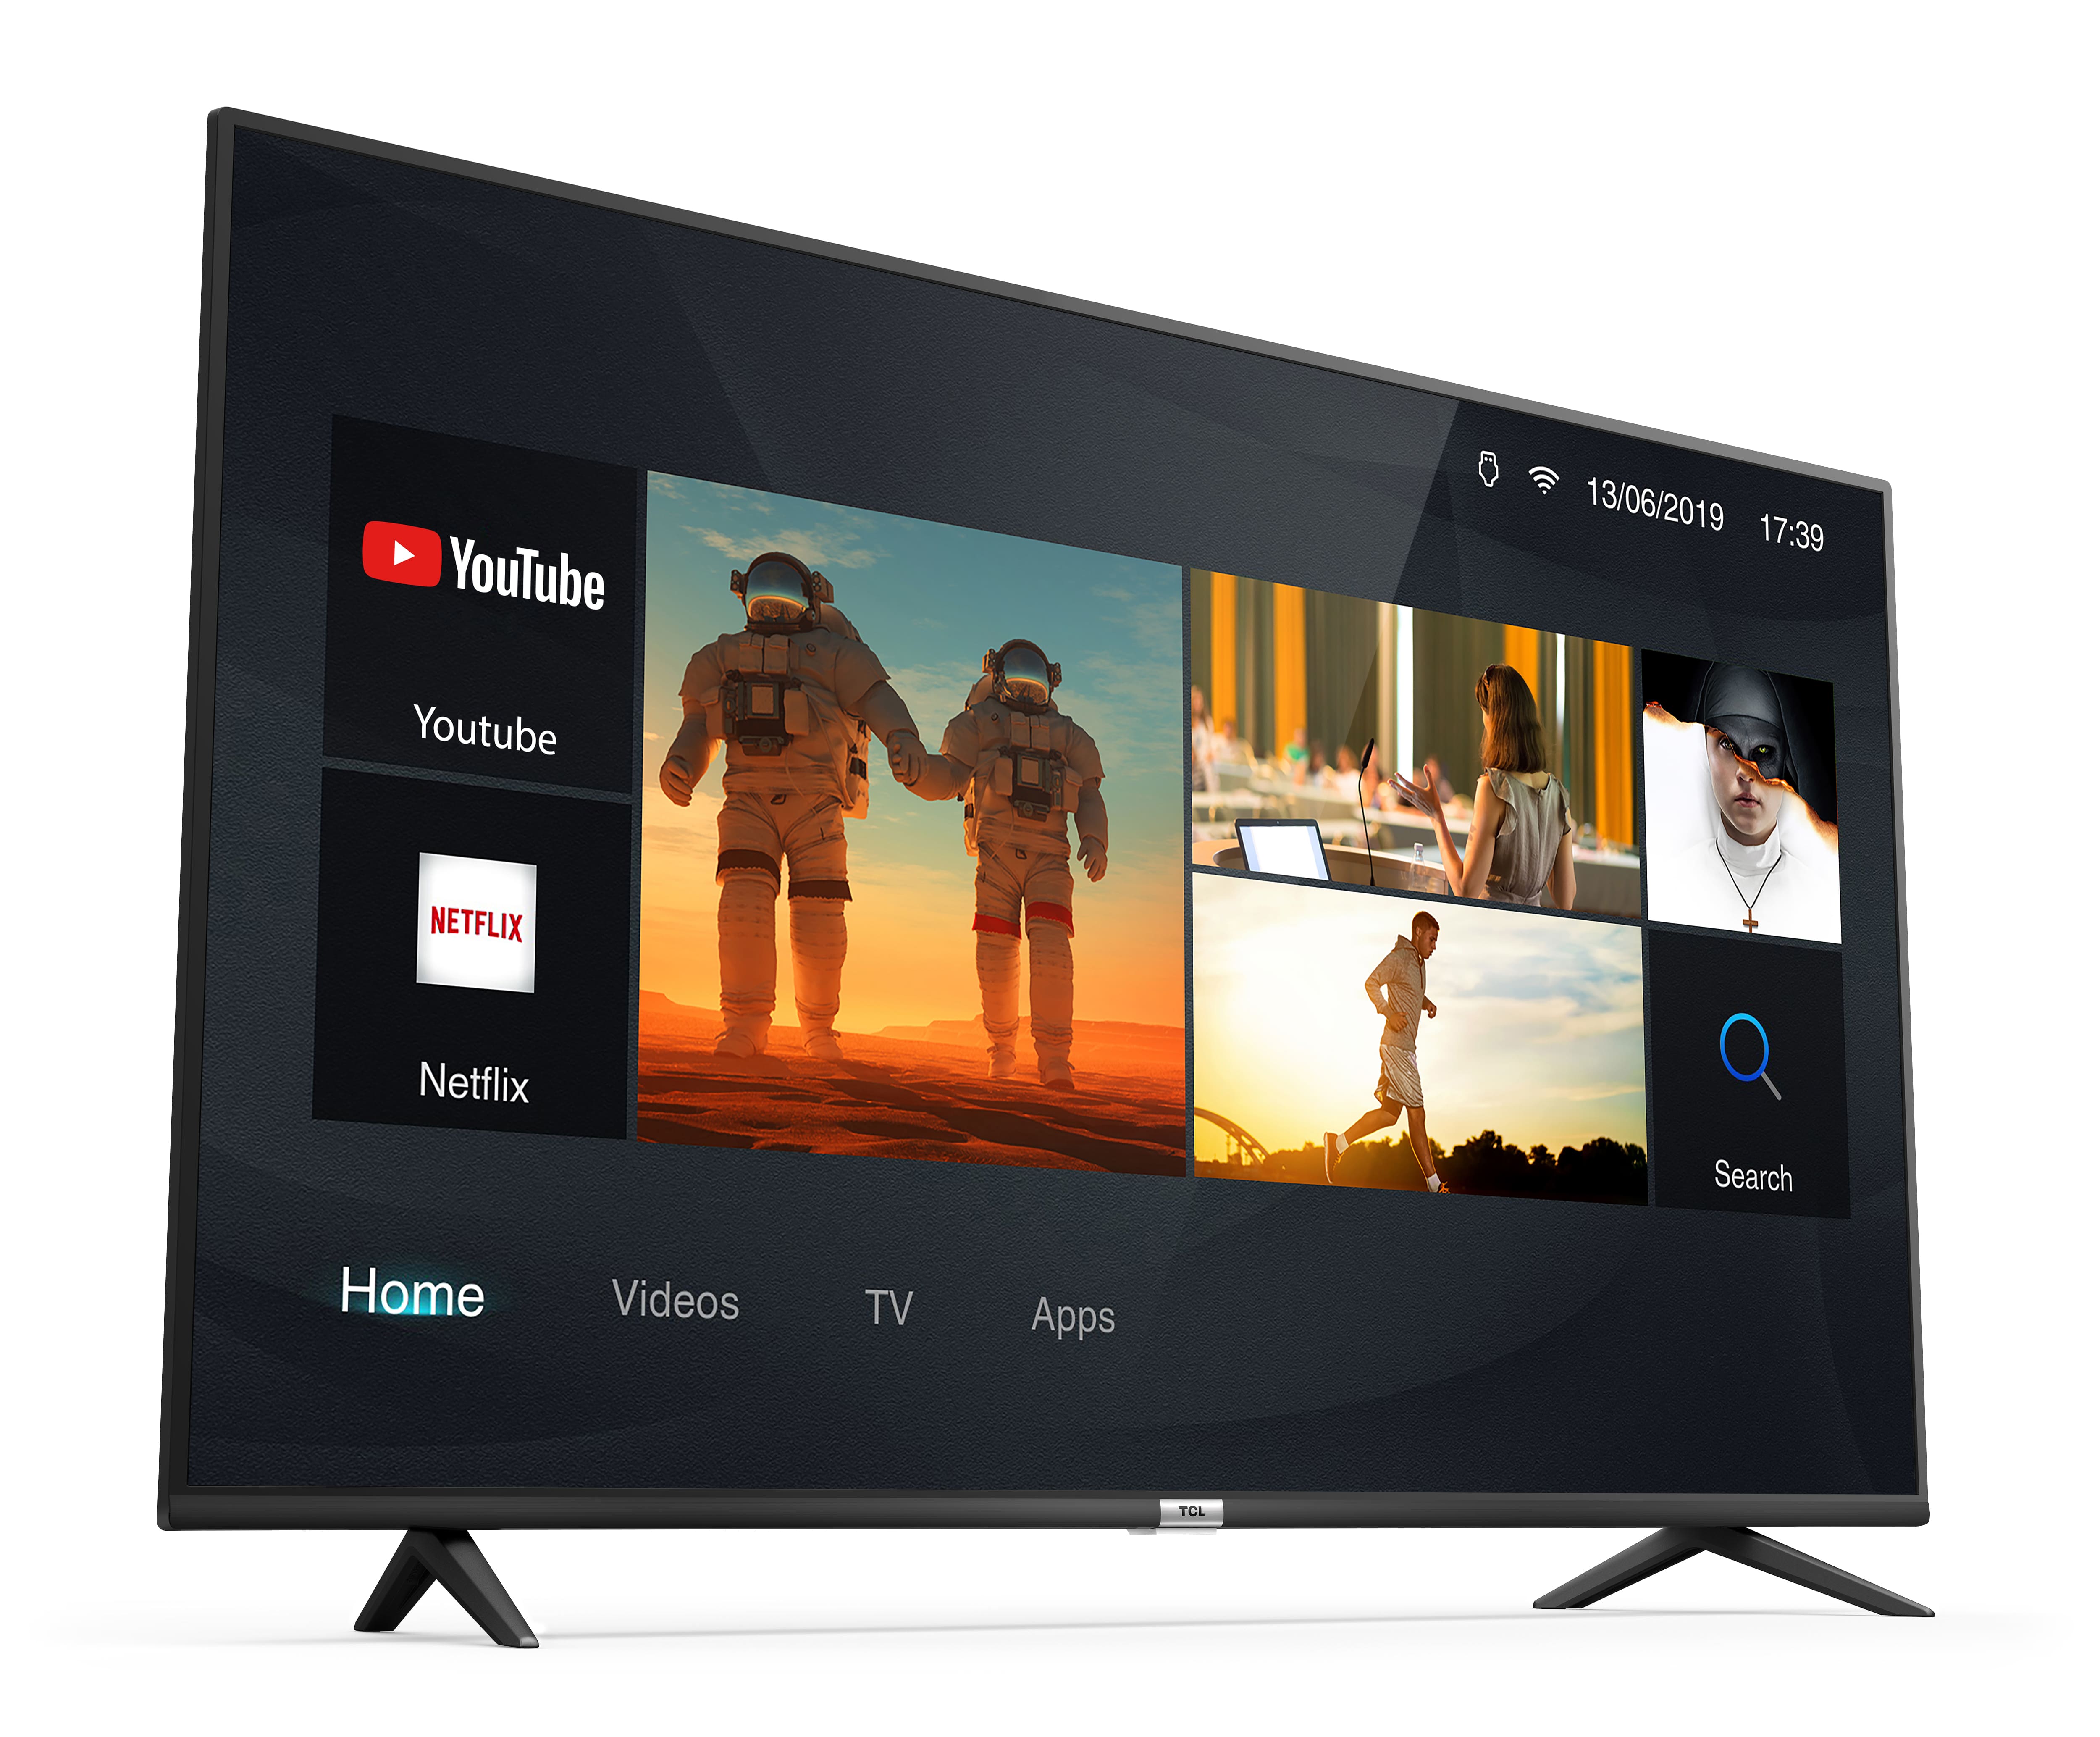 tcl-led-tv-32-32s6200-hd-android-tv-65589_44065.jpg